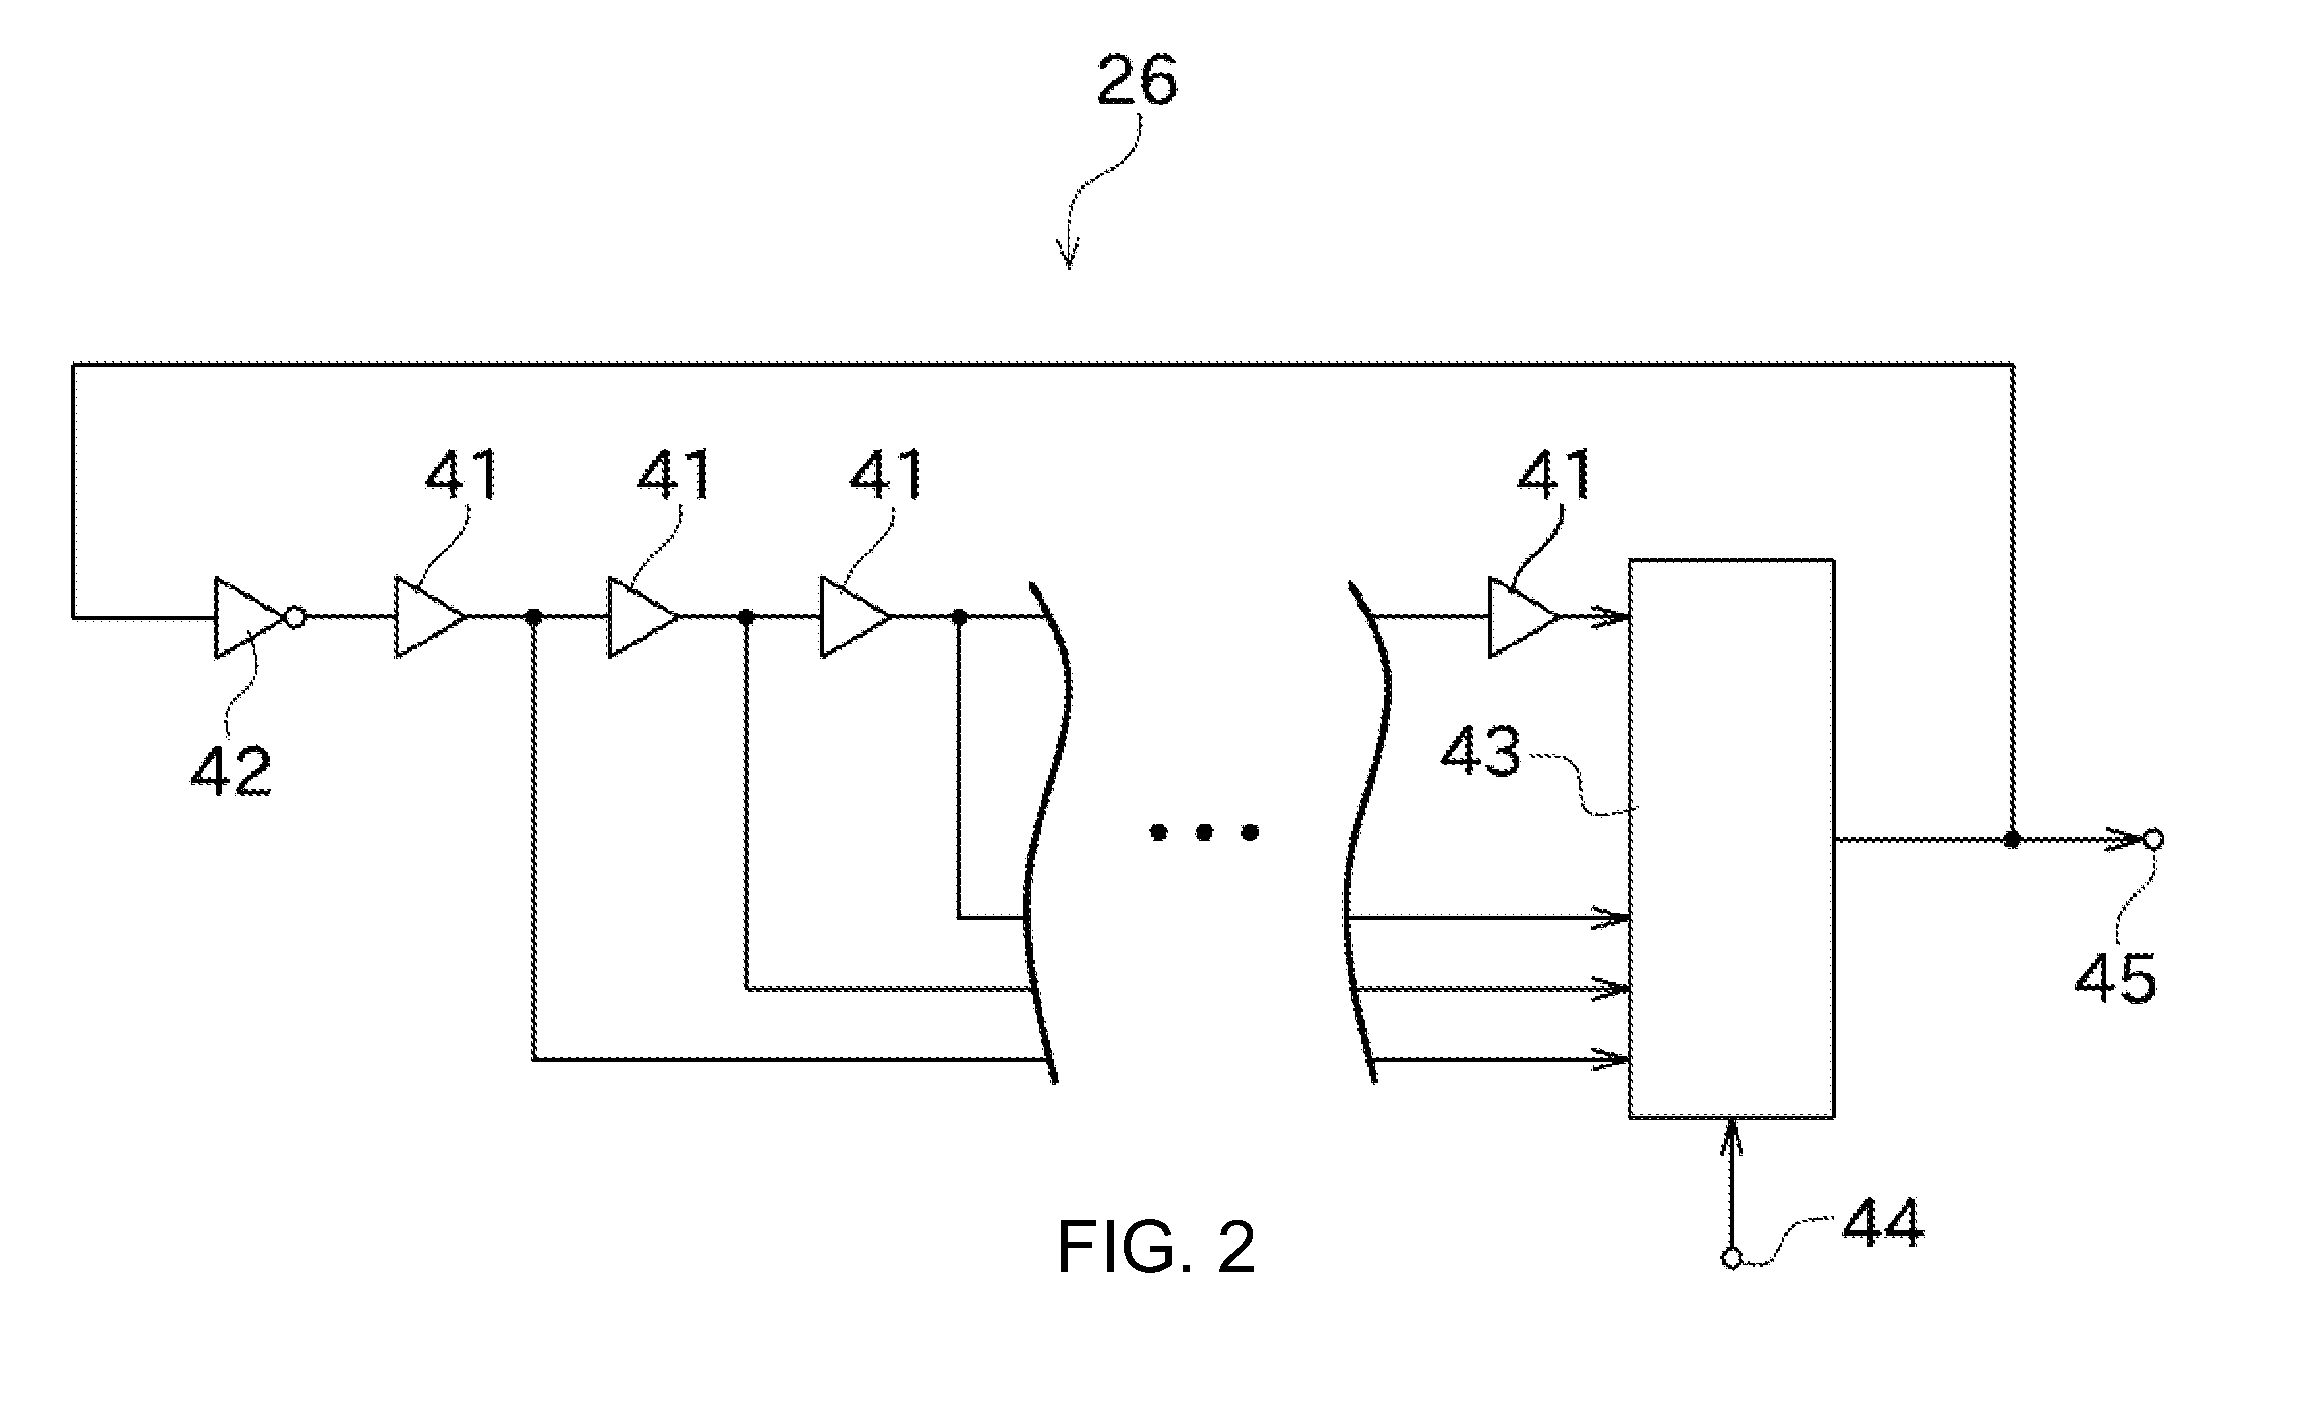 Reference frequency generating device